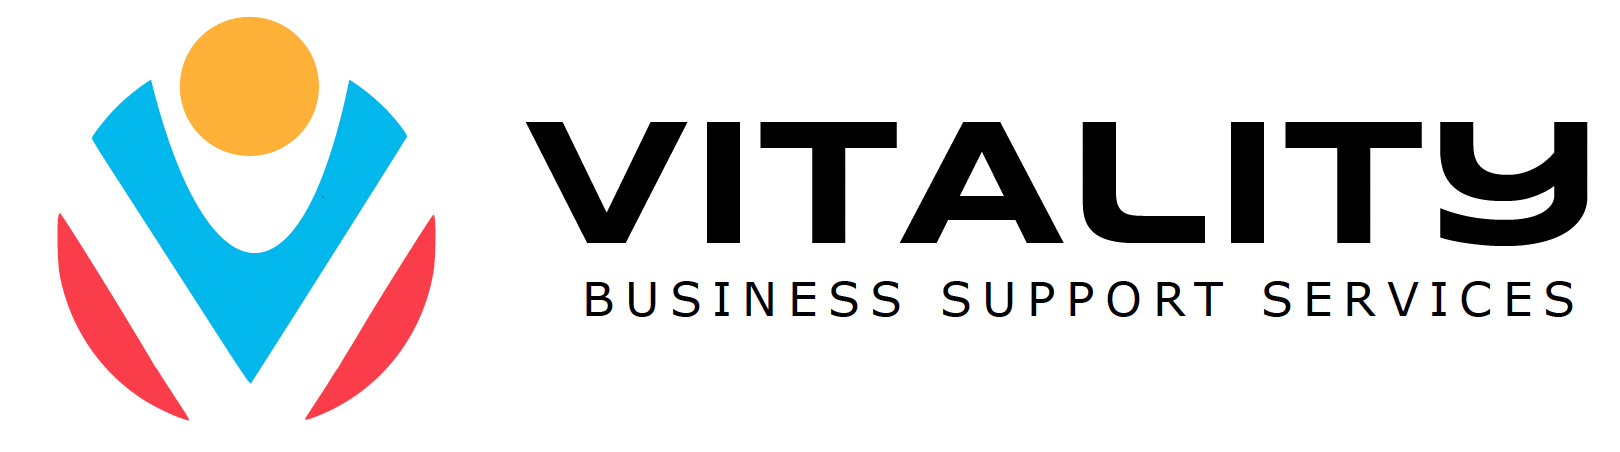 Vitality Business Support Services